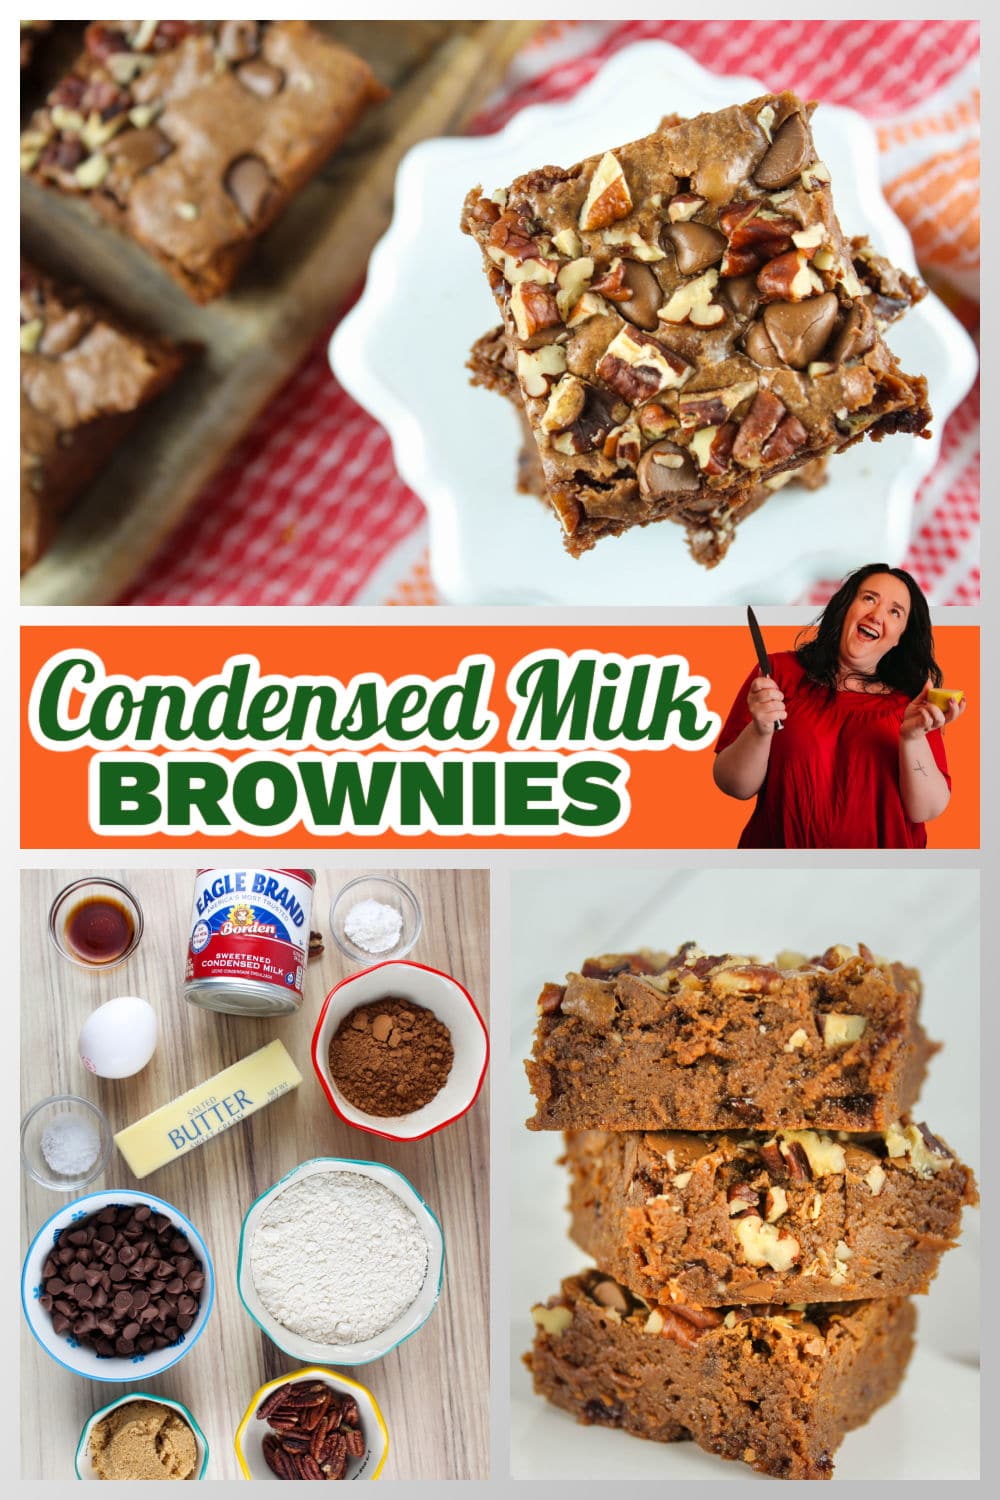 These Condensed Milk Brownies are just the right amount of sweet plus very chocolatey and fudgy! One brownie will fulfill every sweet tooth - you taste the milk chocolate, chopped pecans and fudgy goodness in every bite!  via @foodhussy